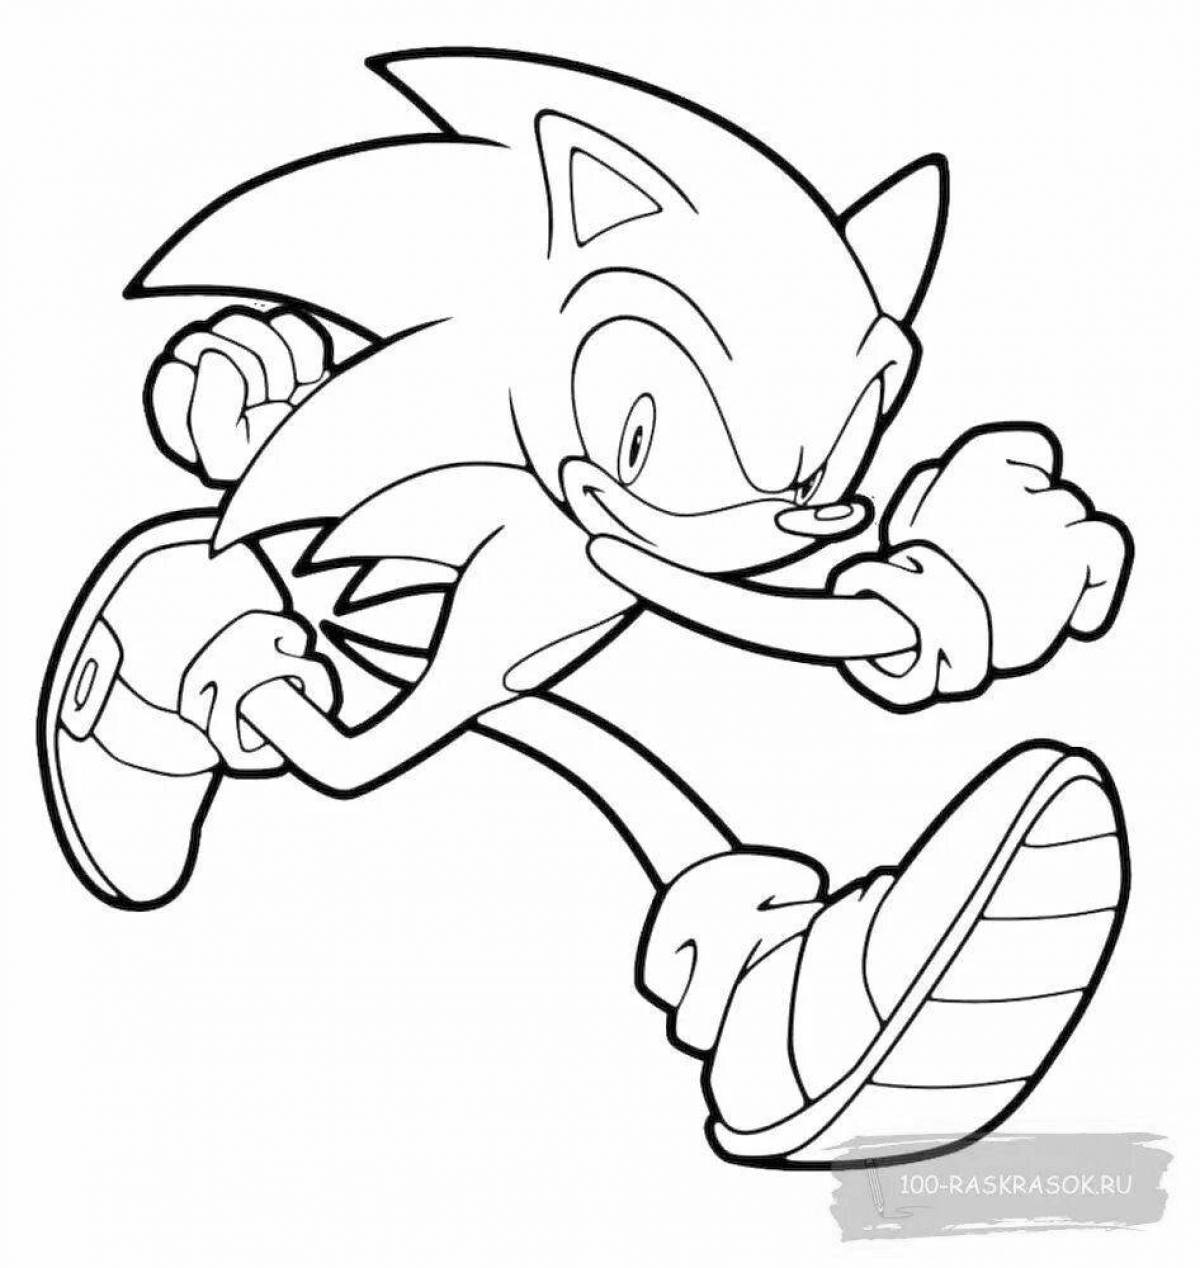 Playful sonic shredder coloring page